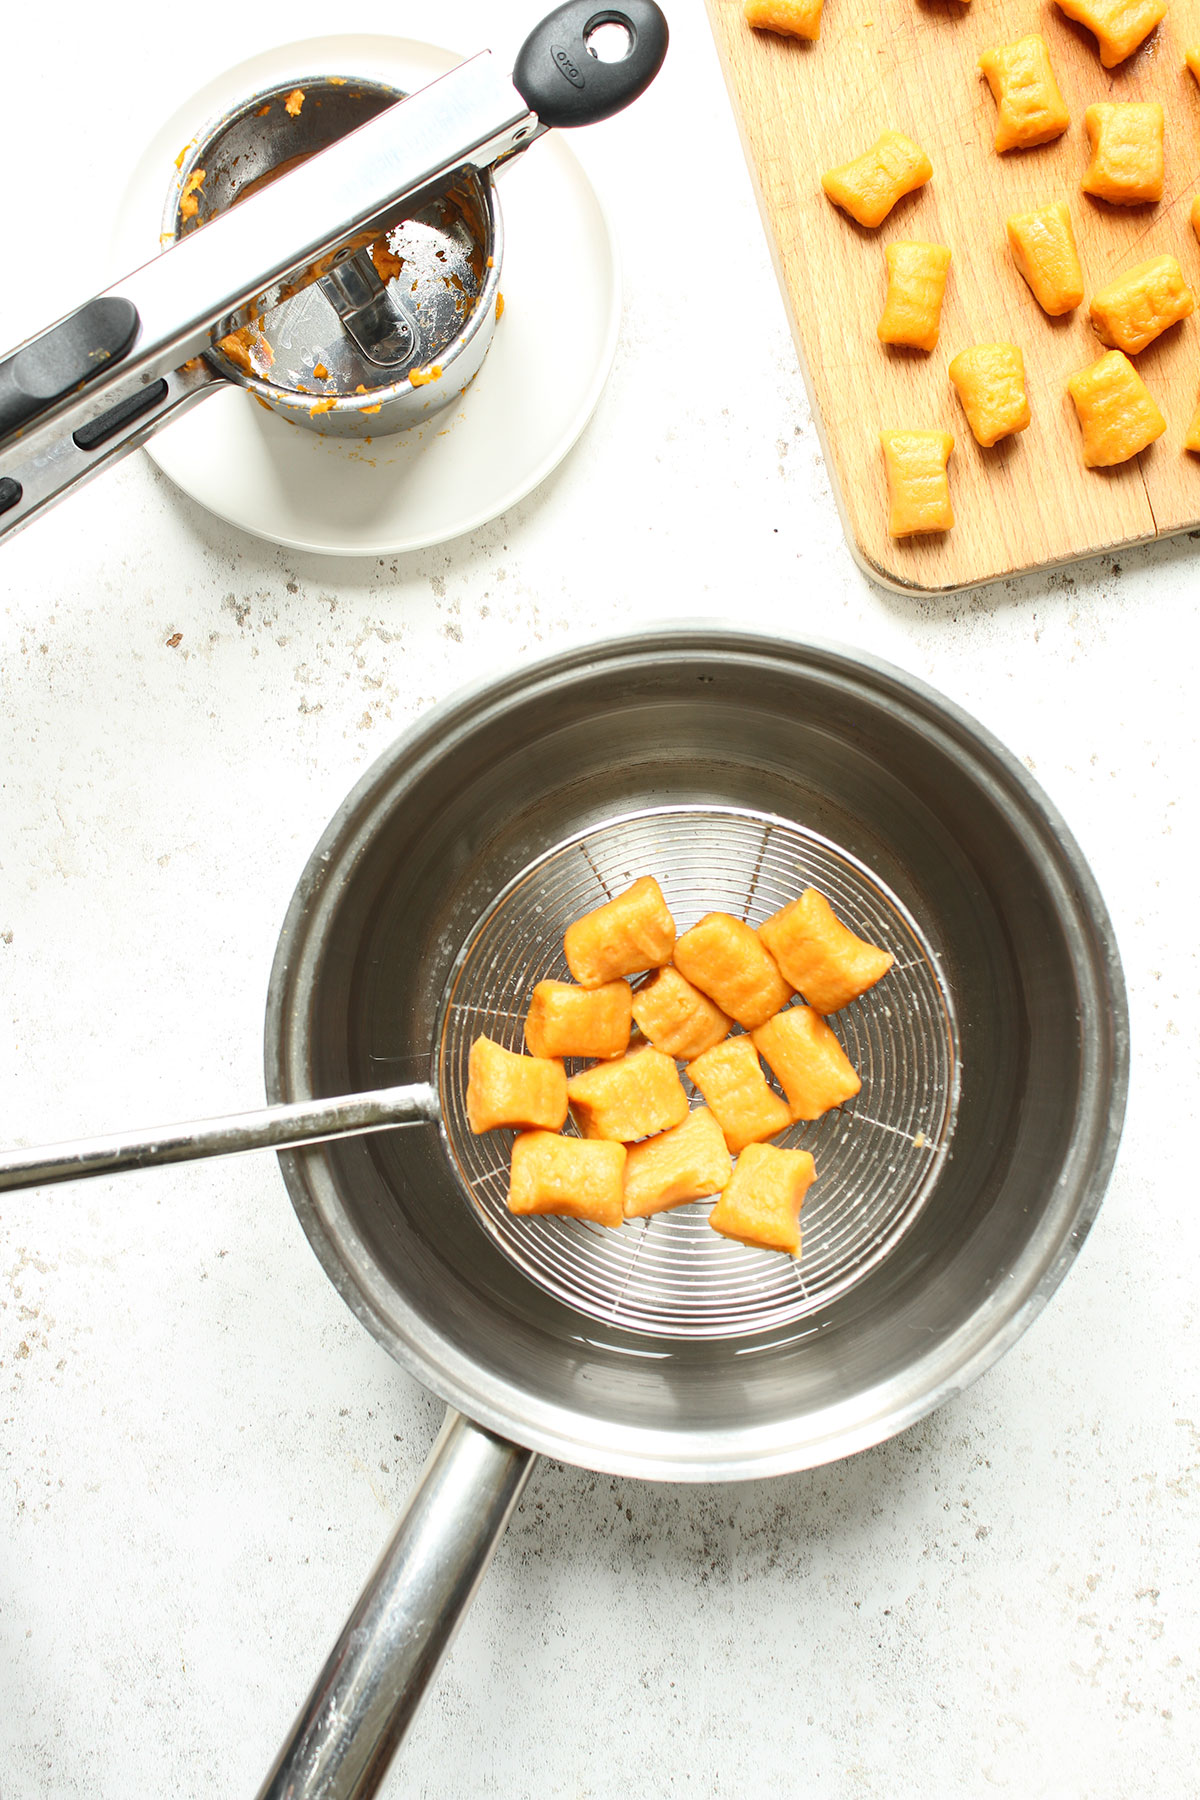 Cooking the formed gnocchi in boiling salted water.